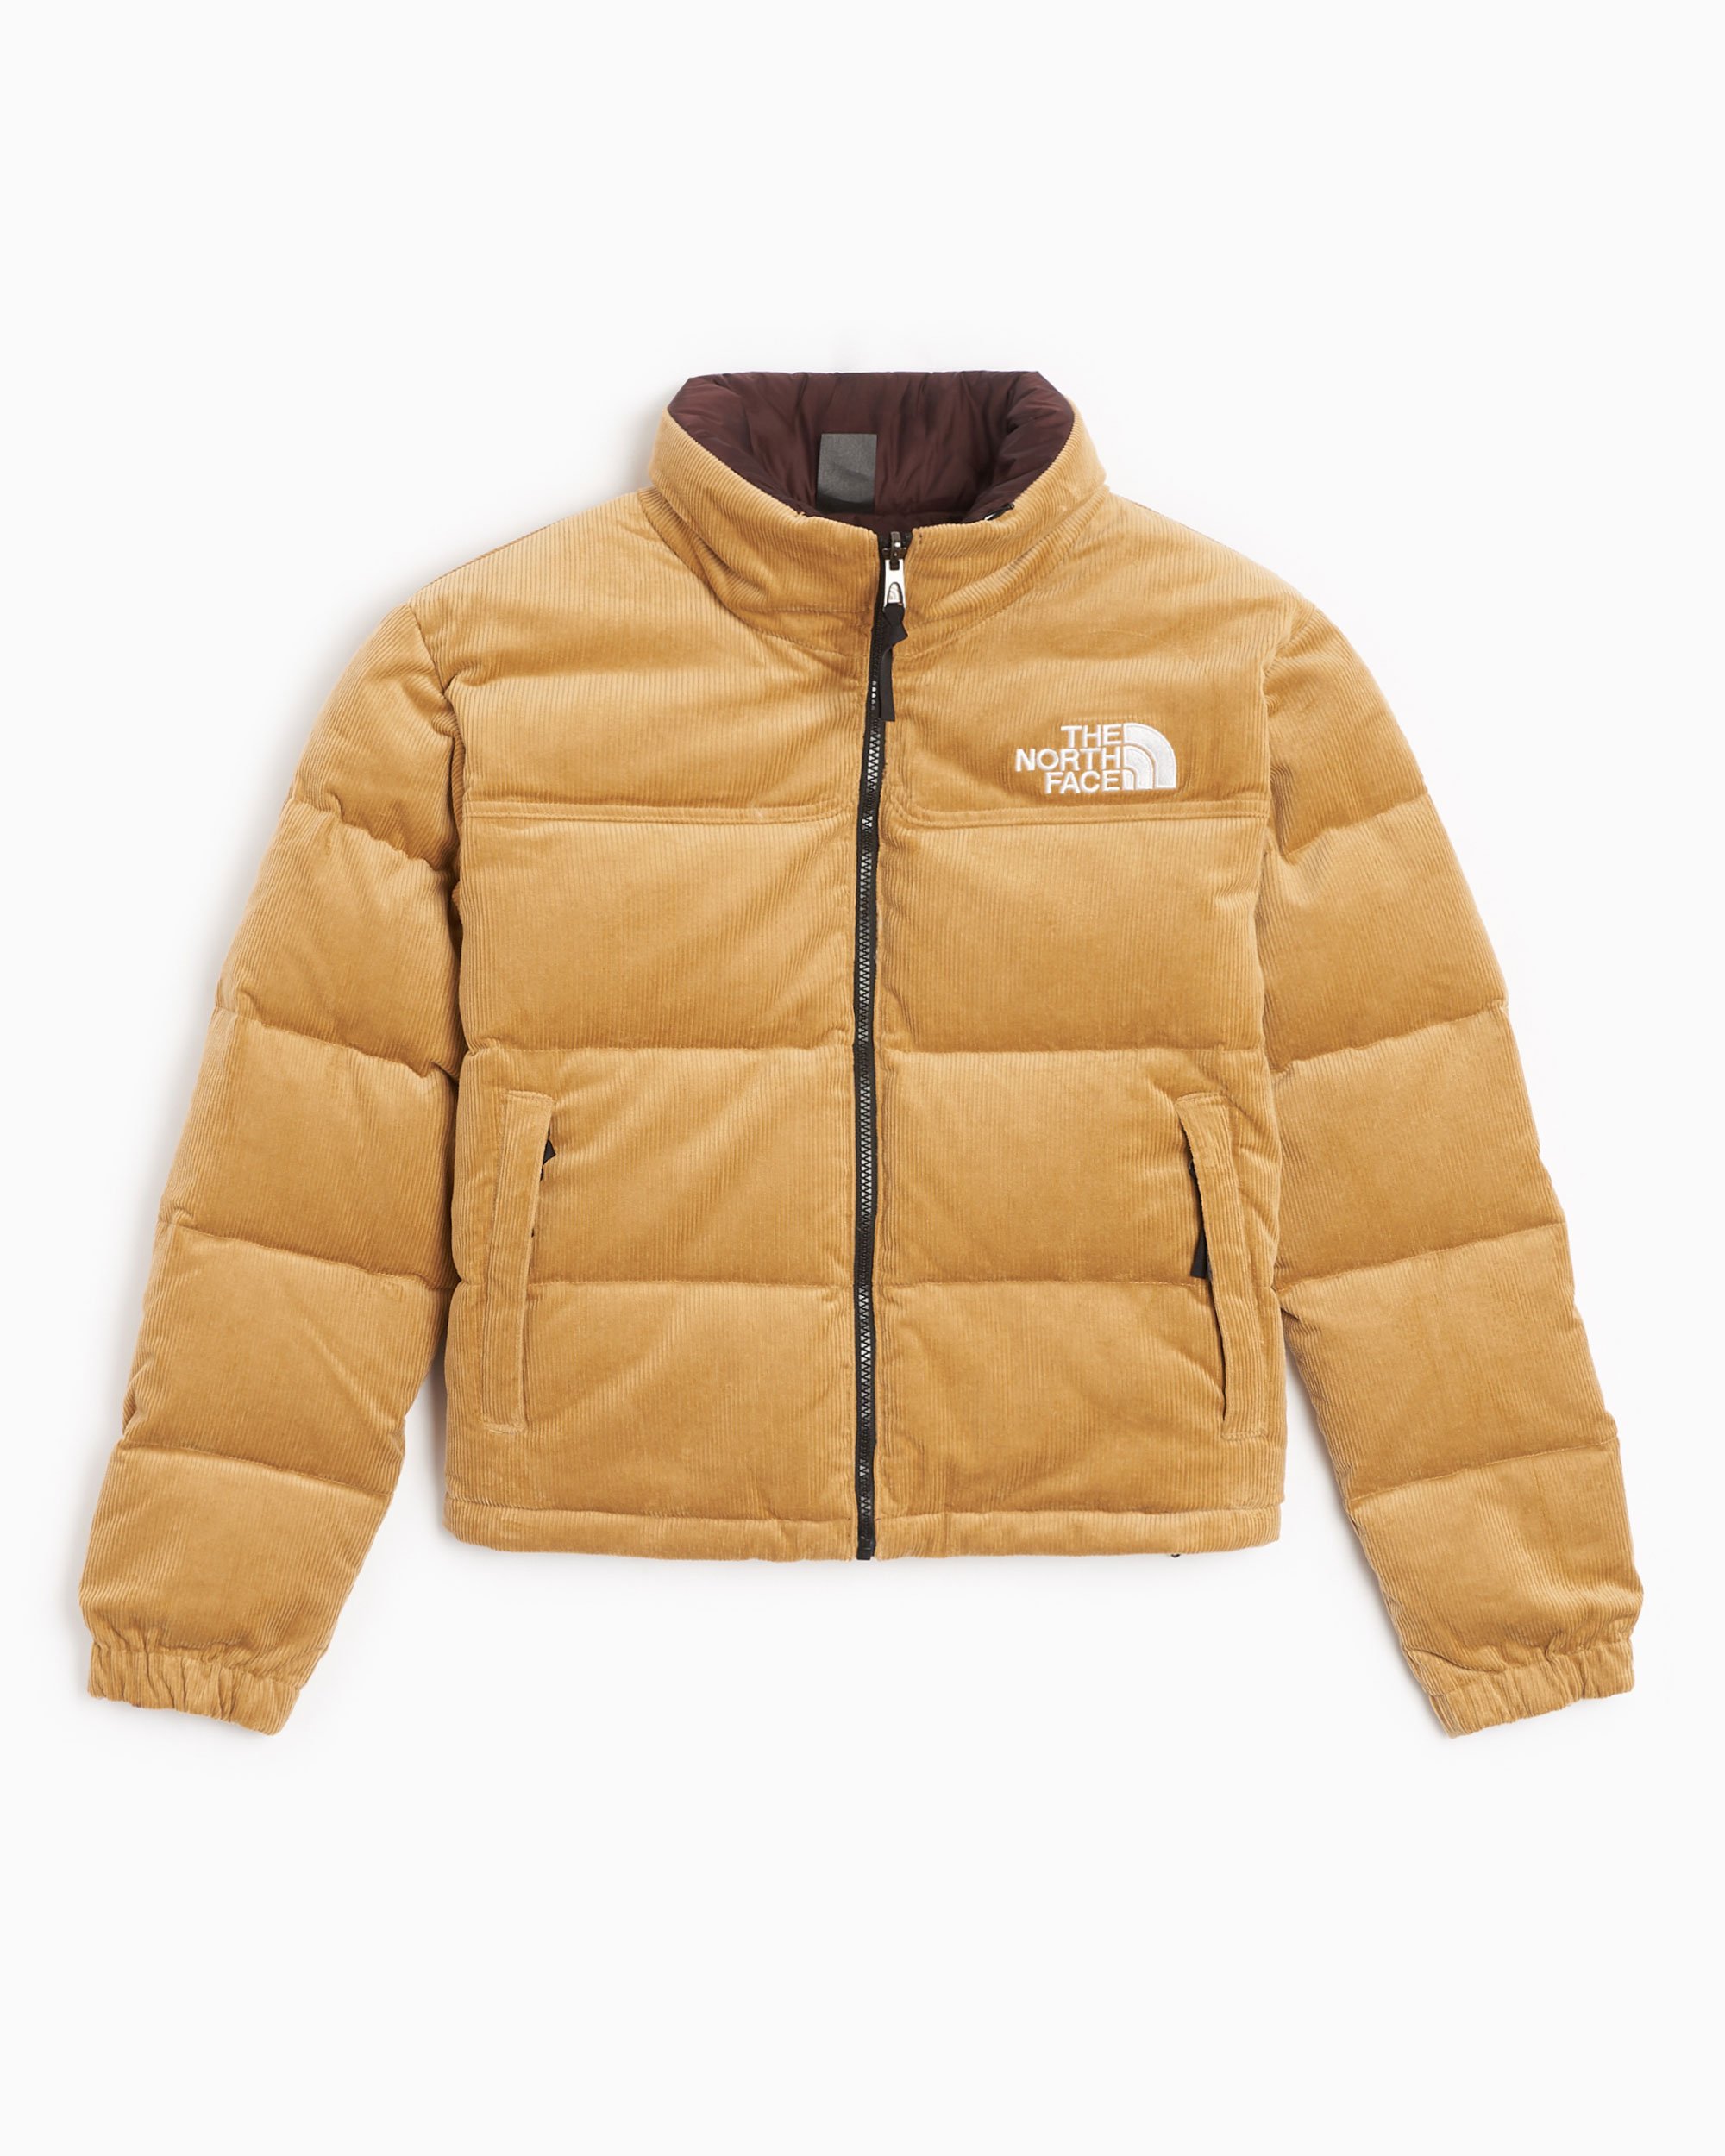 The North Face 1992 Women's Reversible Nuptse Puffer Jacket